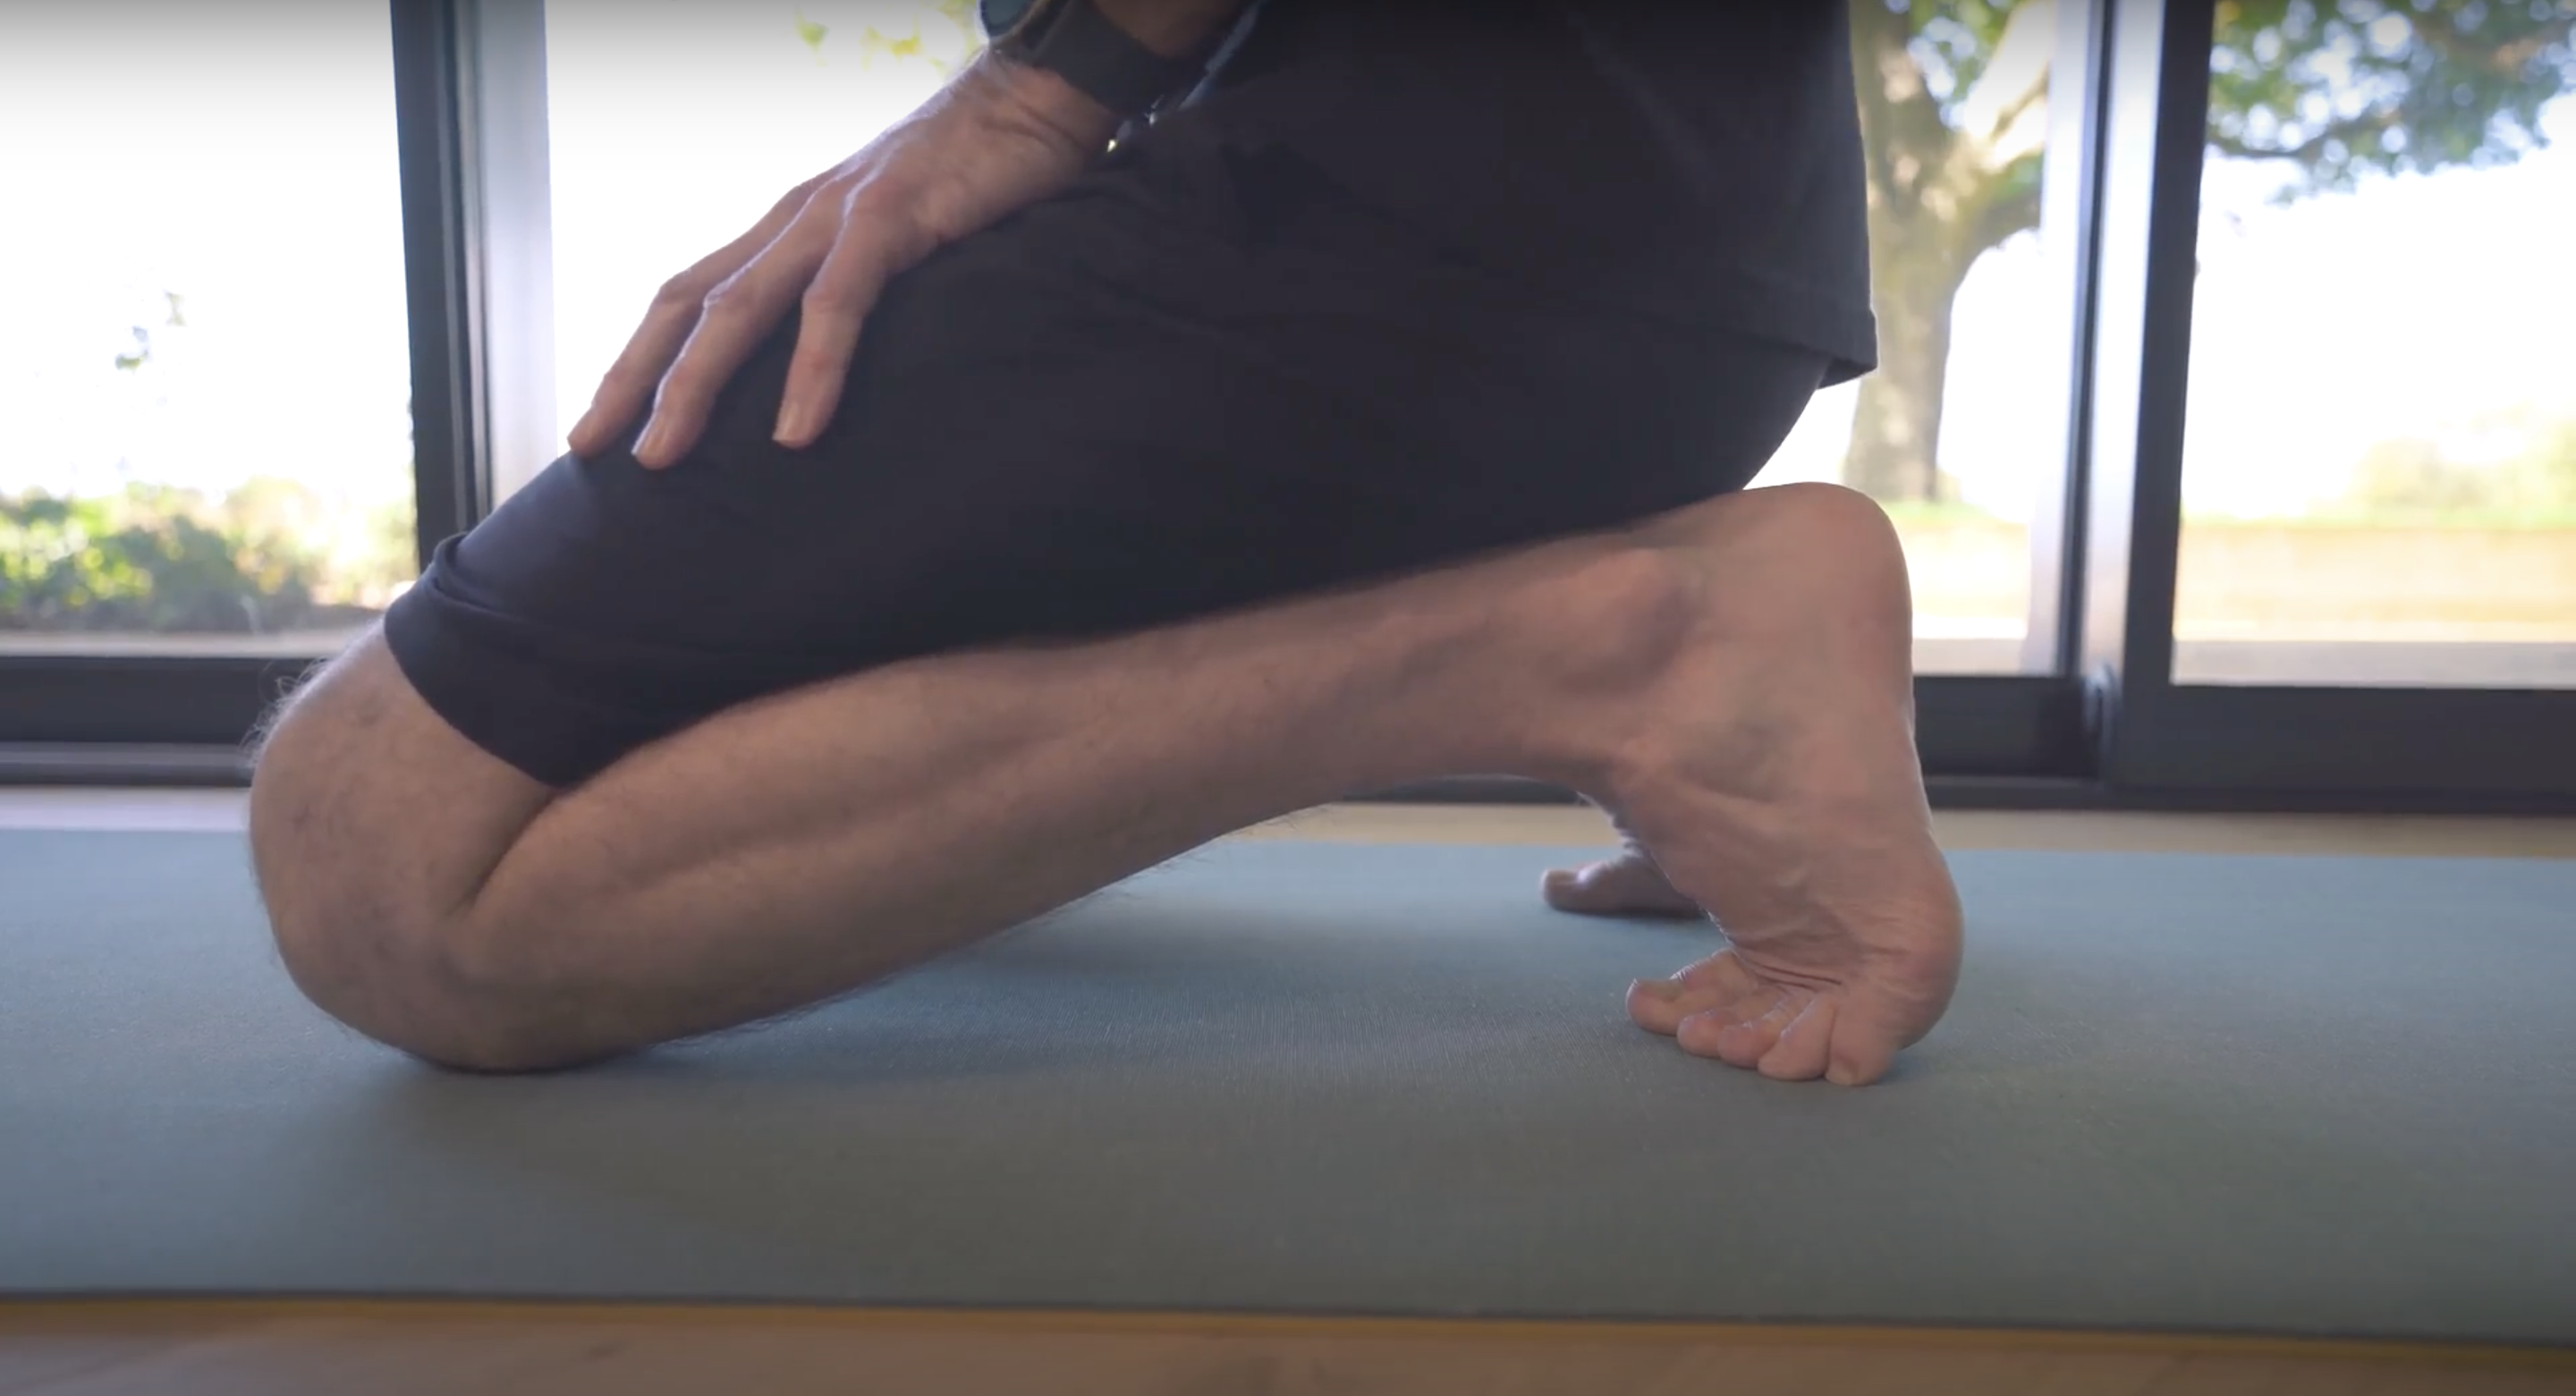 At home foot exercises for flexibility, muscle strength and toe